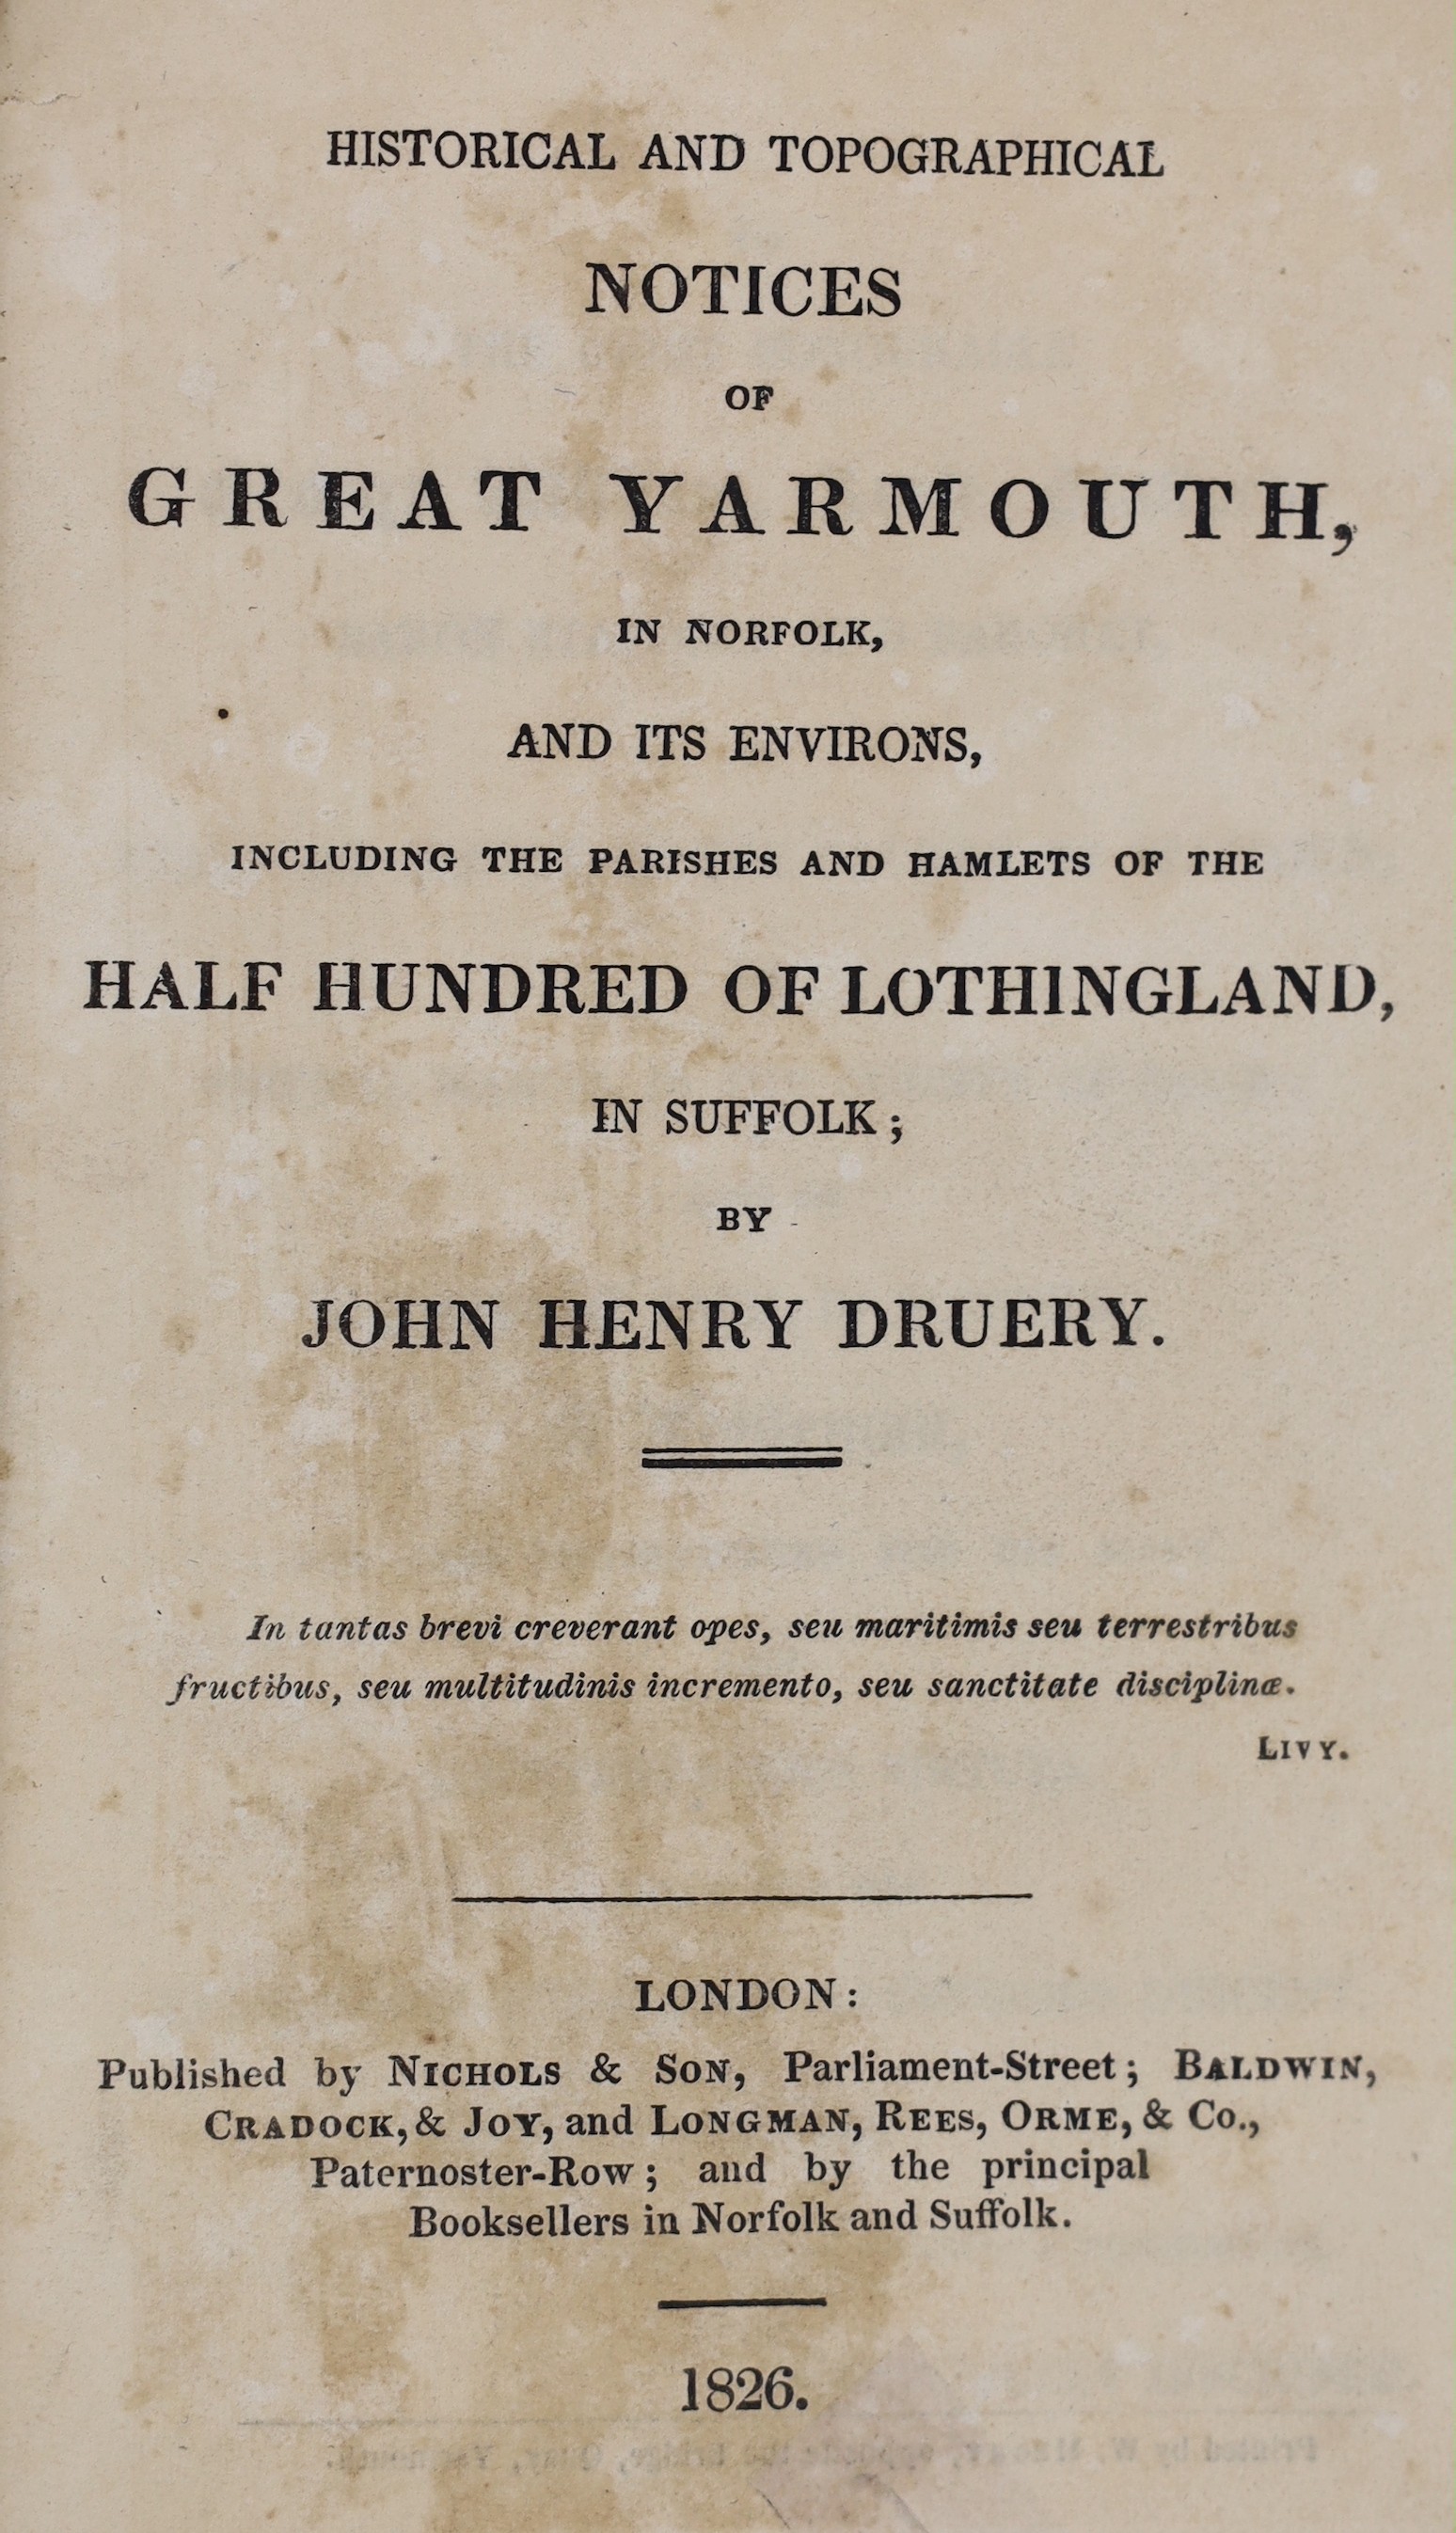 NORFOLK: Druery, John Henry - Historical and Topographical Notices of Great Yarmouth.... and its Environs, including....the Half Hundred of Lothingland, in Suffolk. 9 plates, 2 folded tables, subscribers list and half ti